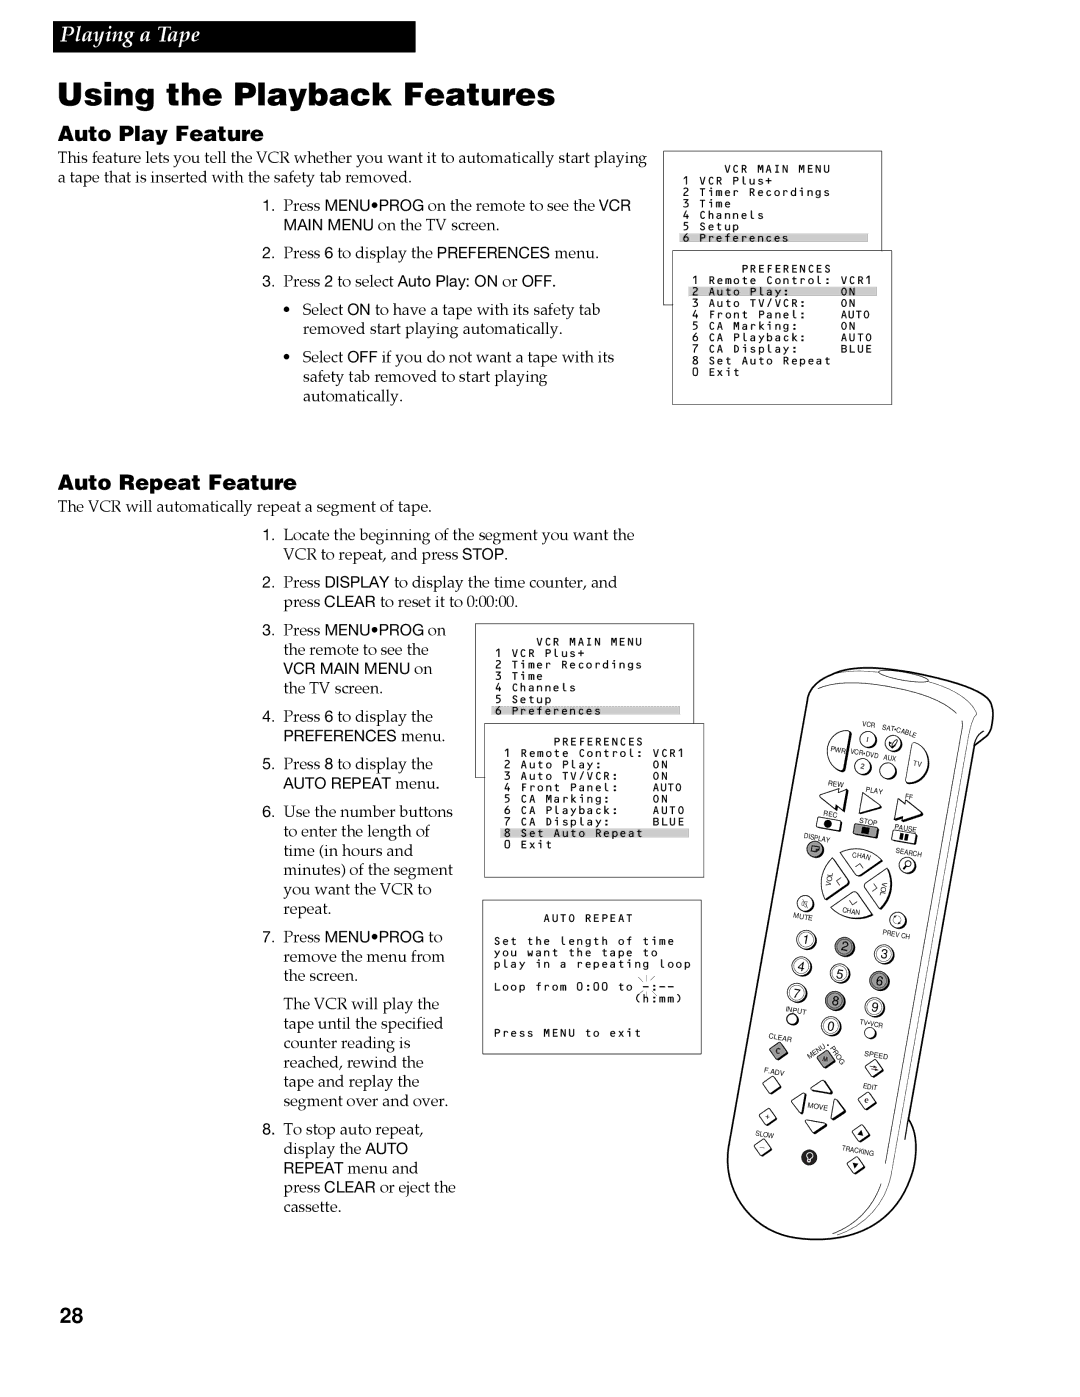 RCA VR688HF manual Auto Play Feature, Auto Repeat Feature 